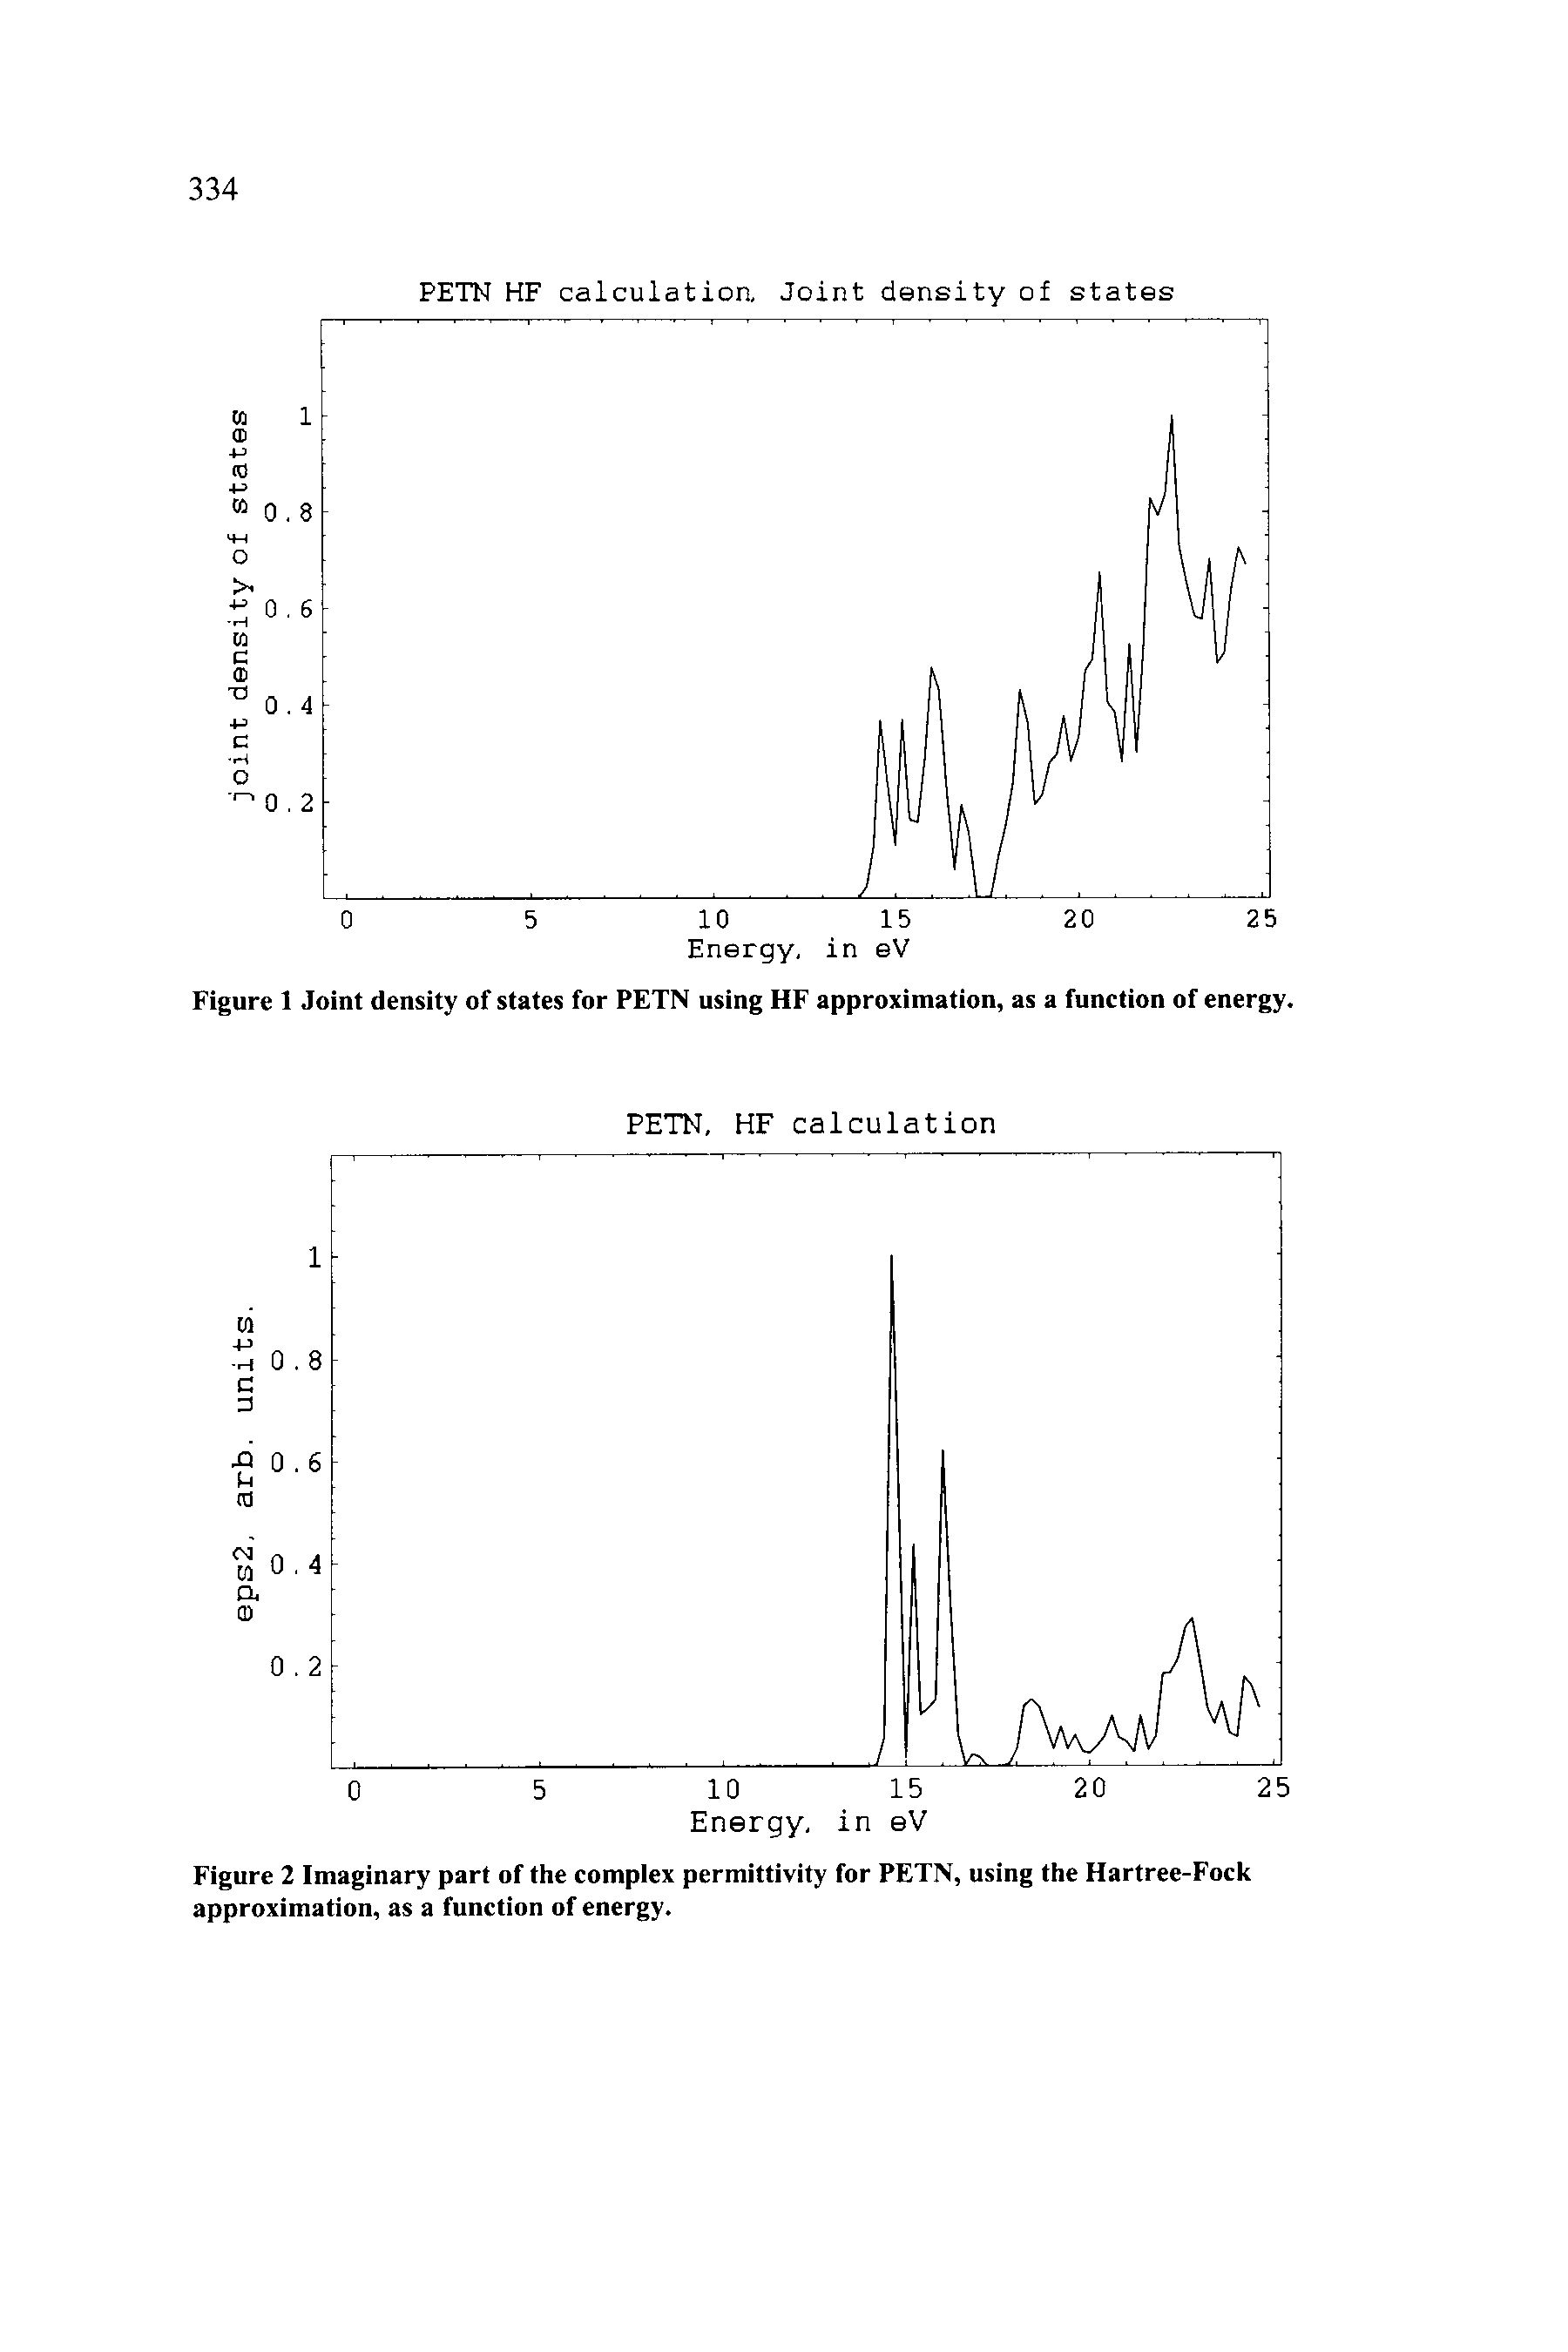 Figure 1 Joint density of states for PETN using HF approximation, as a function of energy.